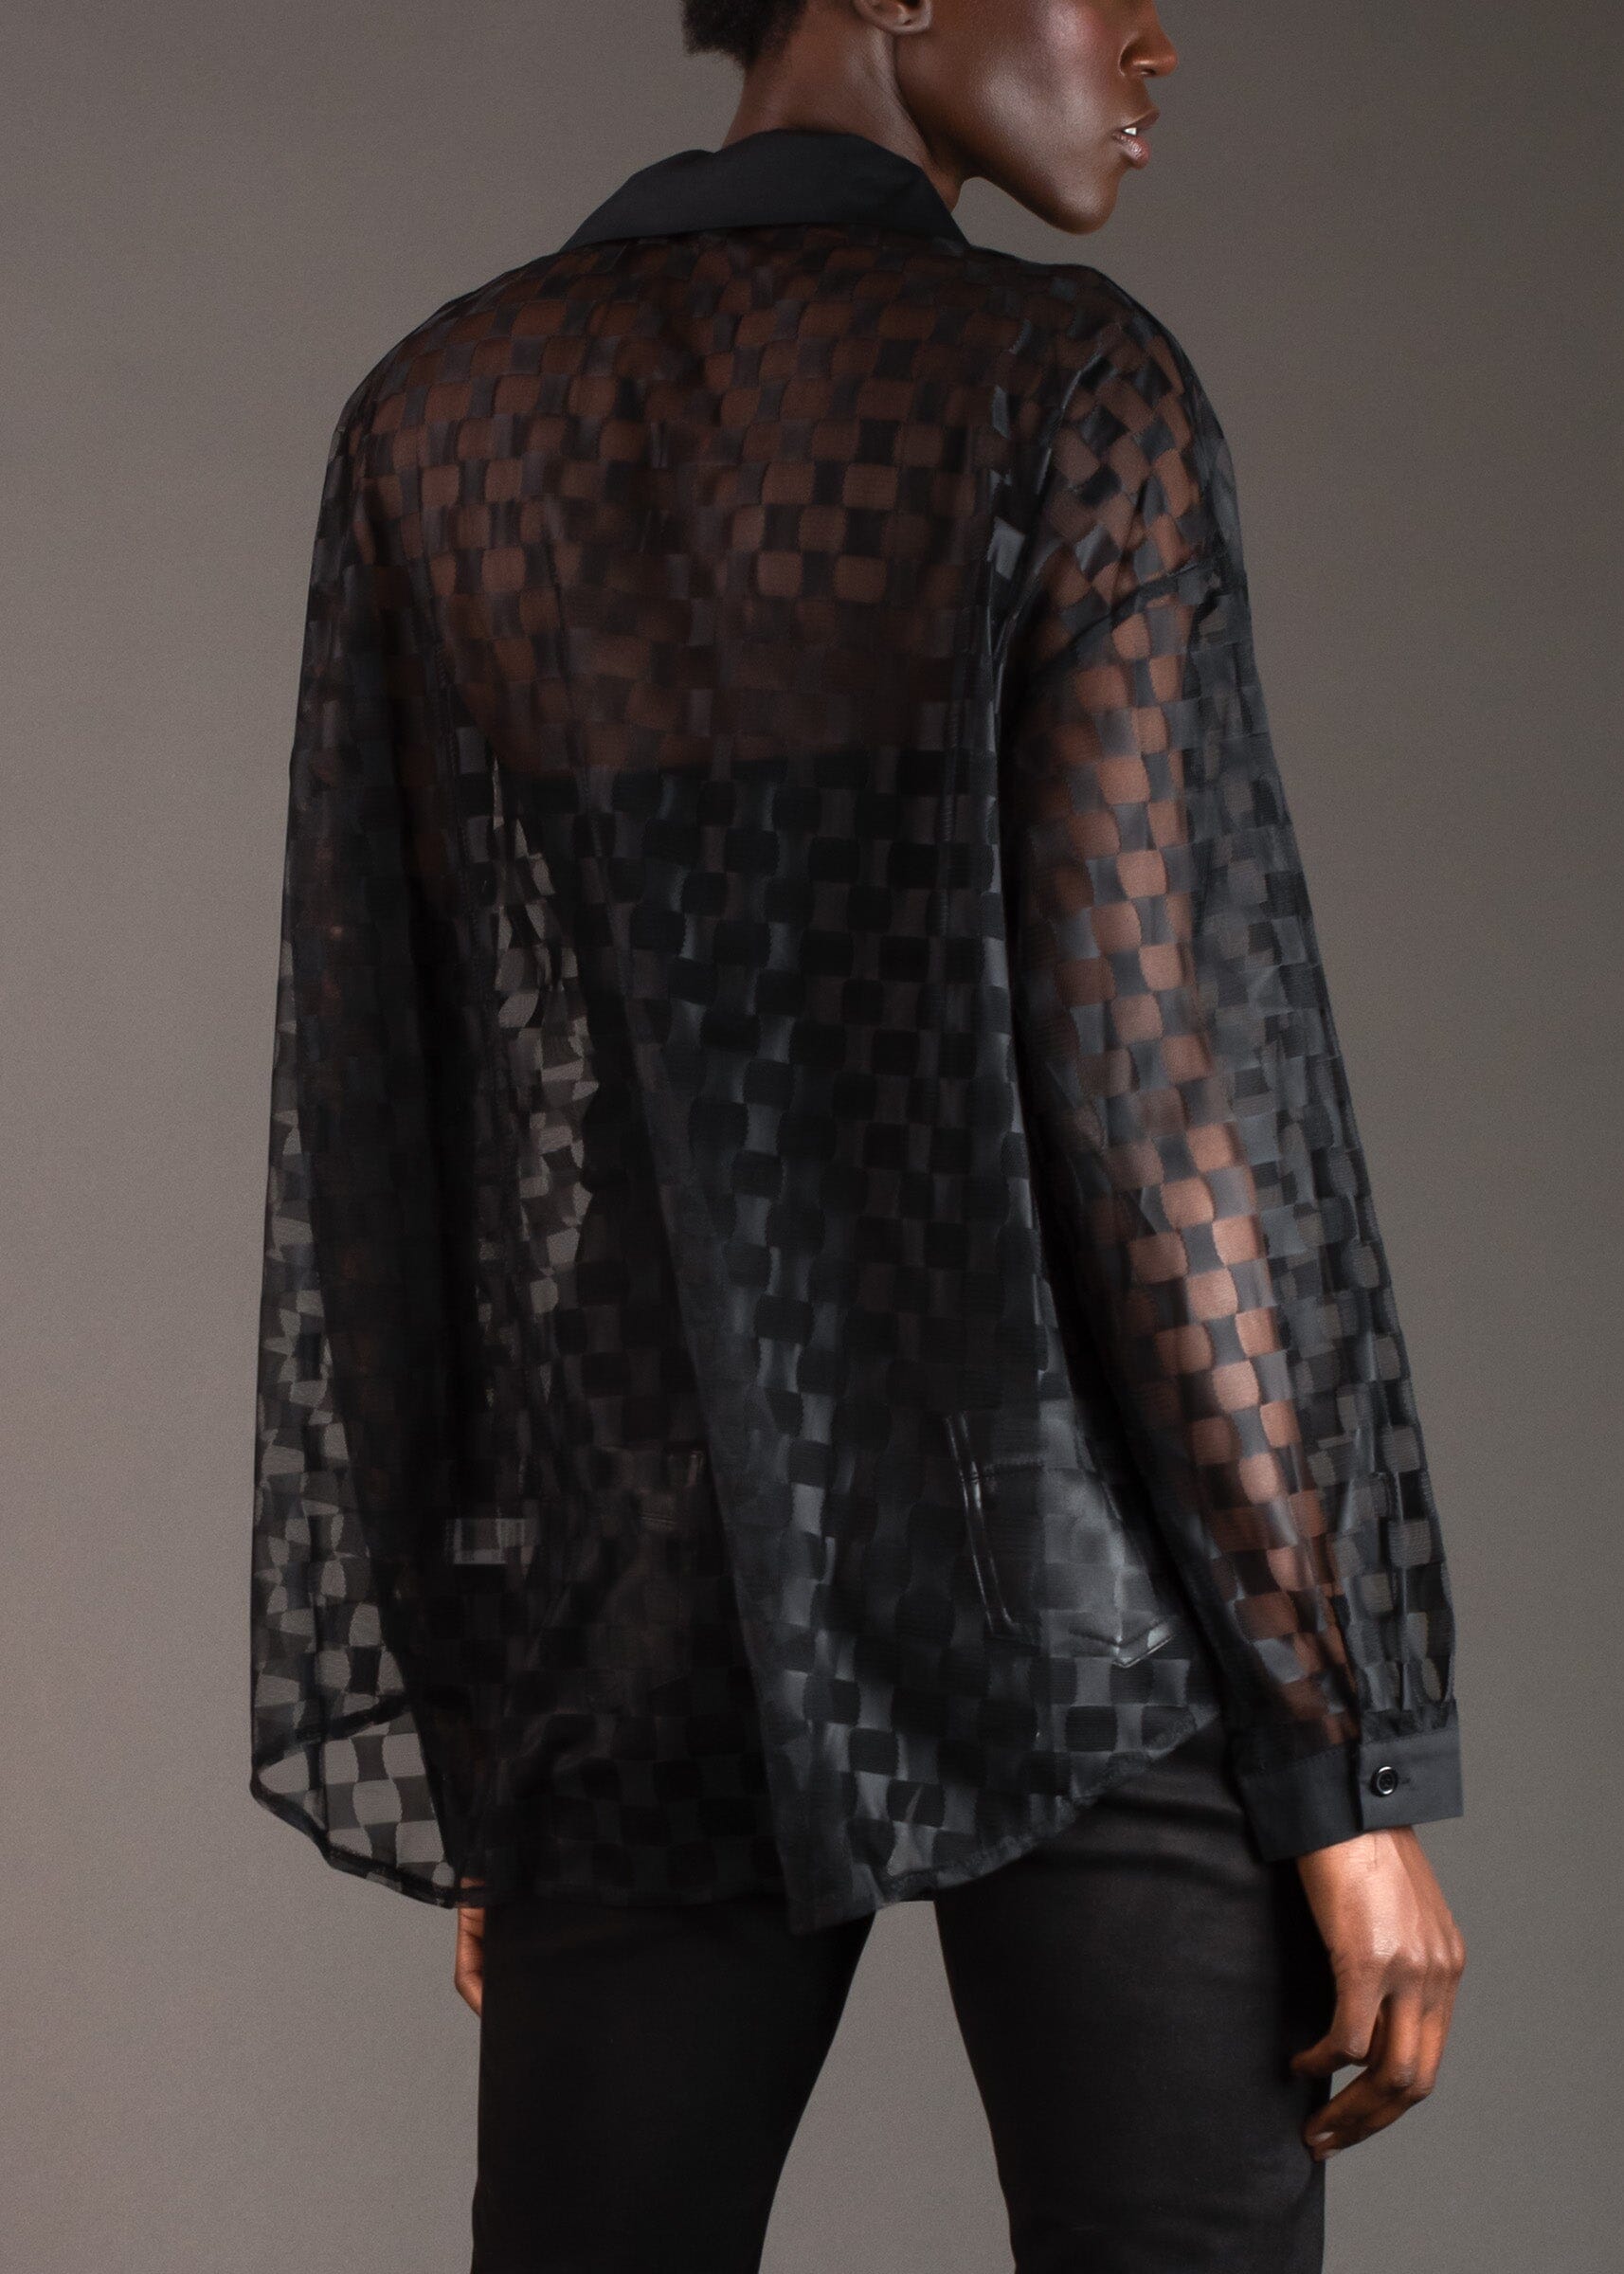 Sheer Checkered Button Up Blouses Kate Hewko 